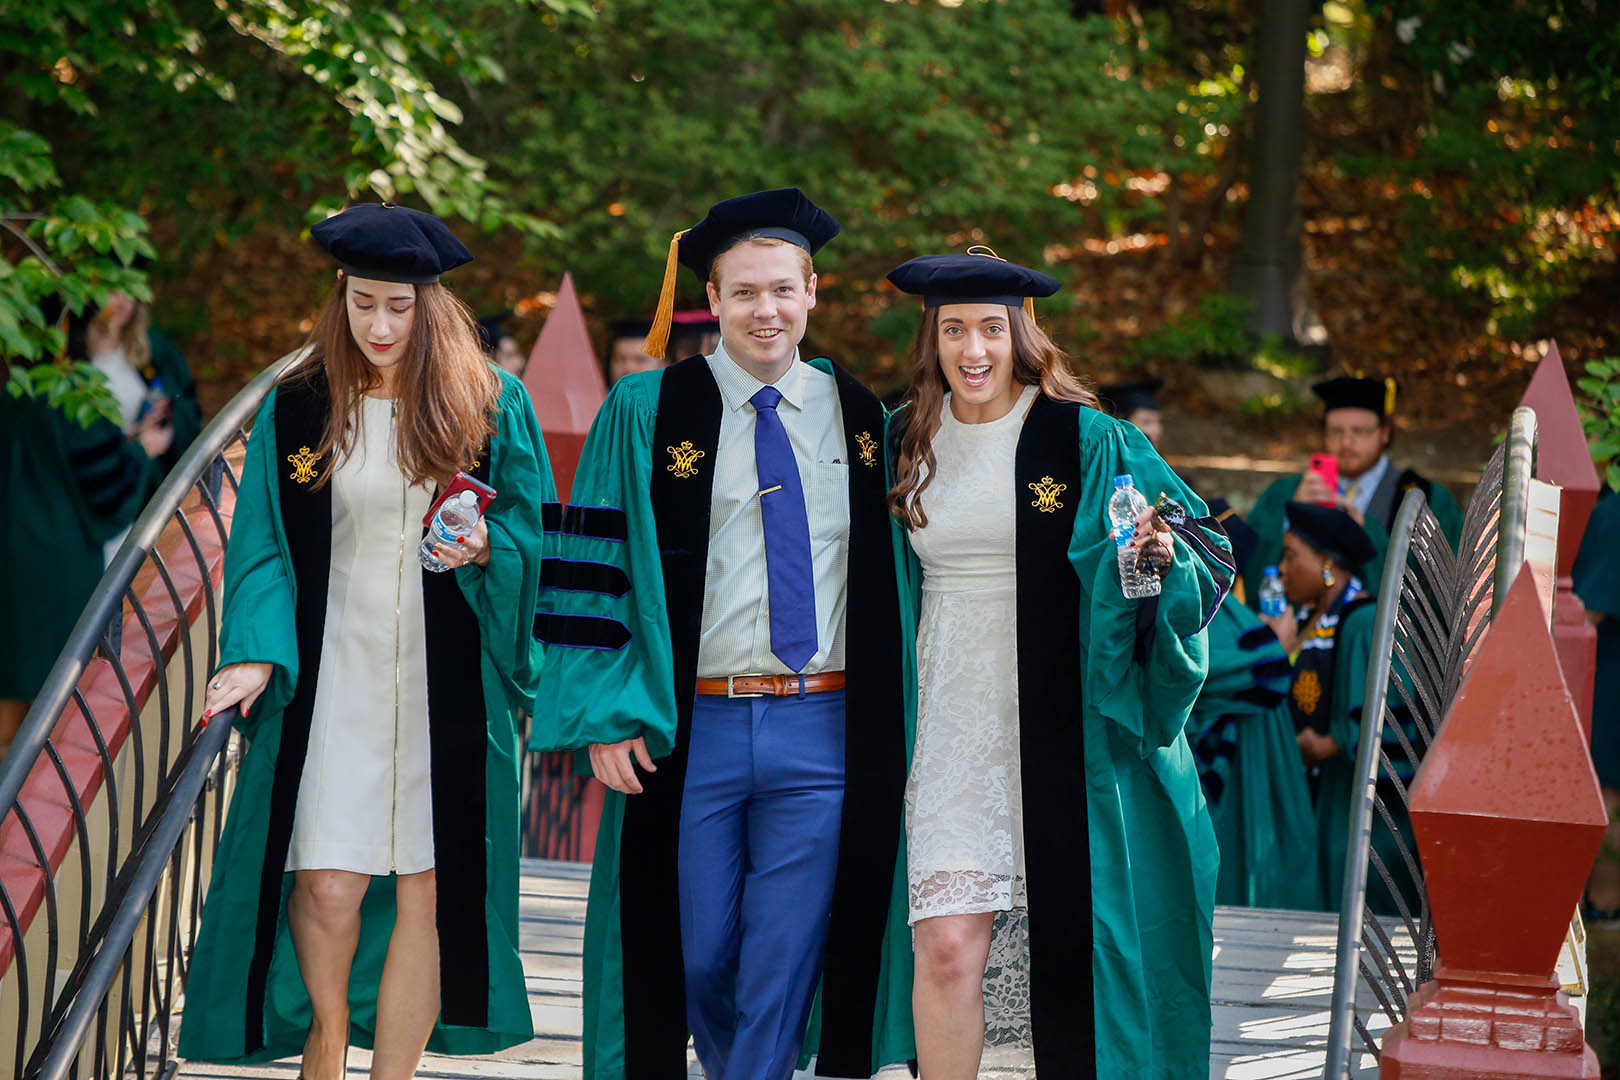 Commencement 2021: A Visual Celebration | William & Mary Law School